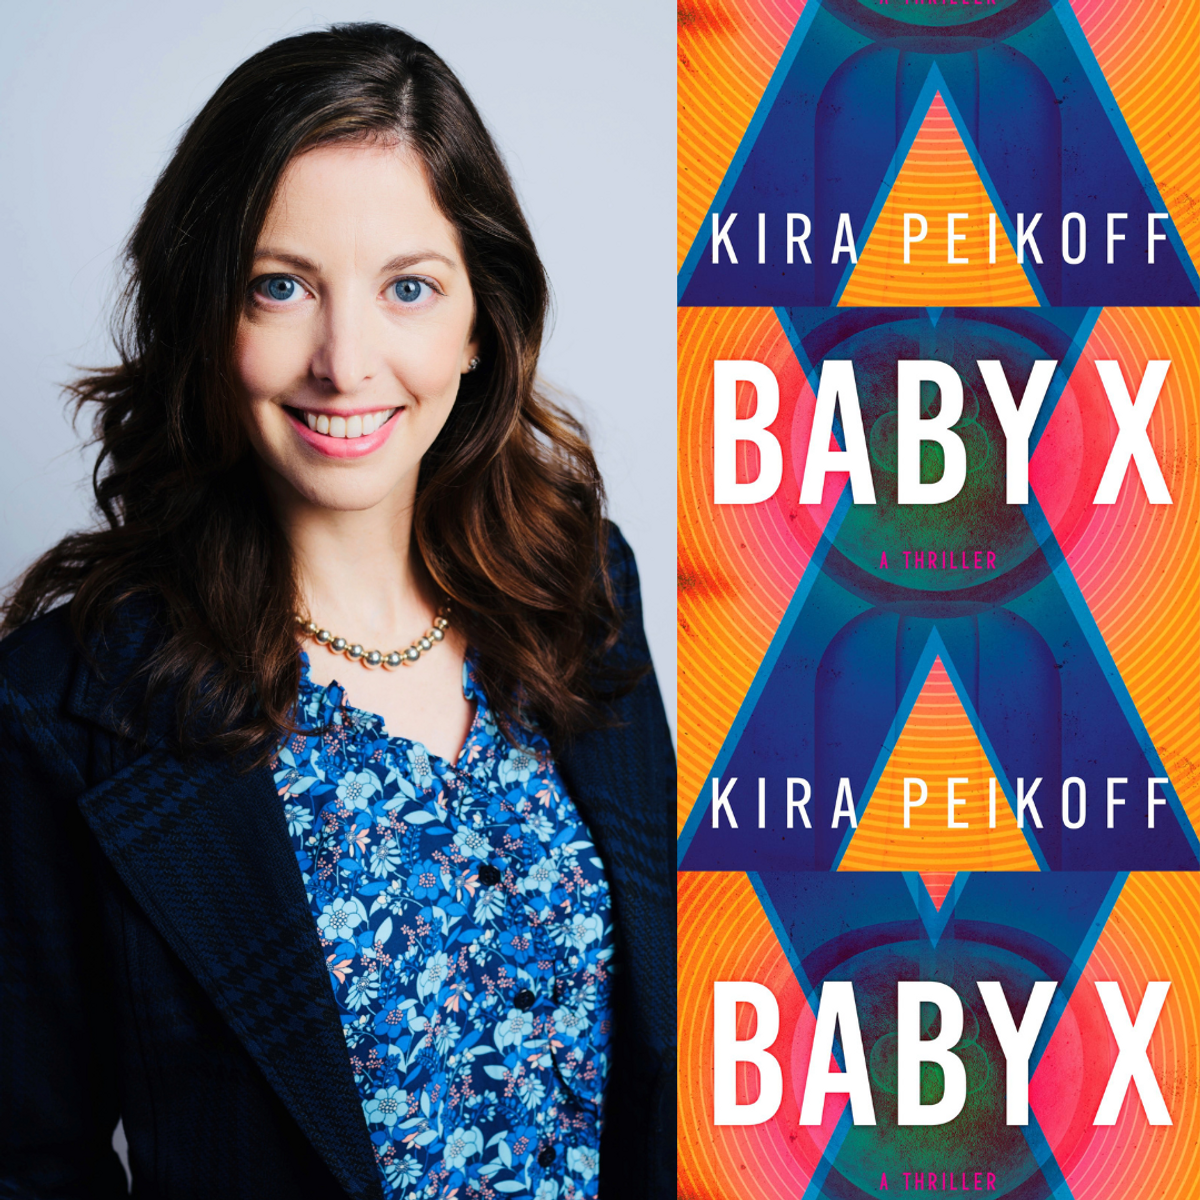 author kira peikoff and book "baby x"